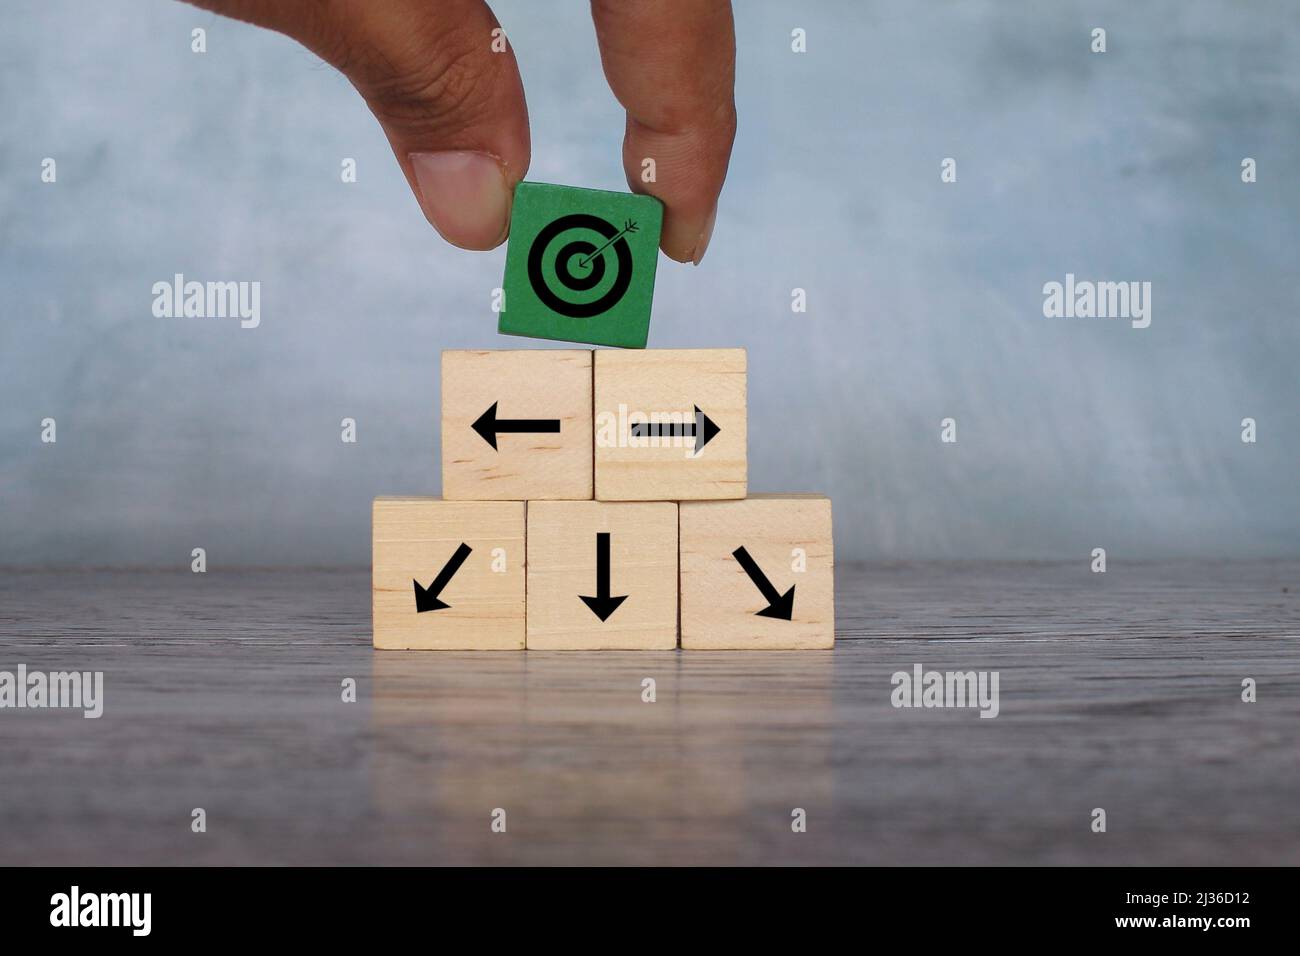 Wooden cubes with target icon and arrow pointing different direction. Organize a team, set a goal. Stock Photo